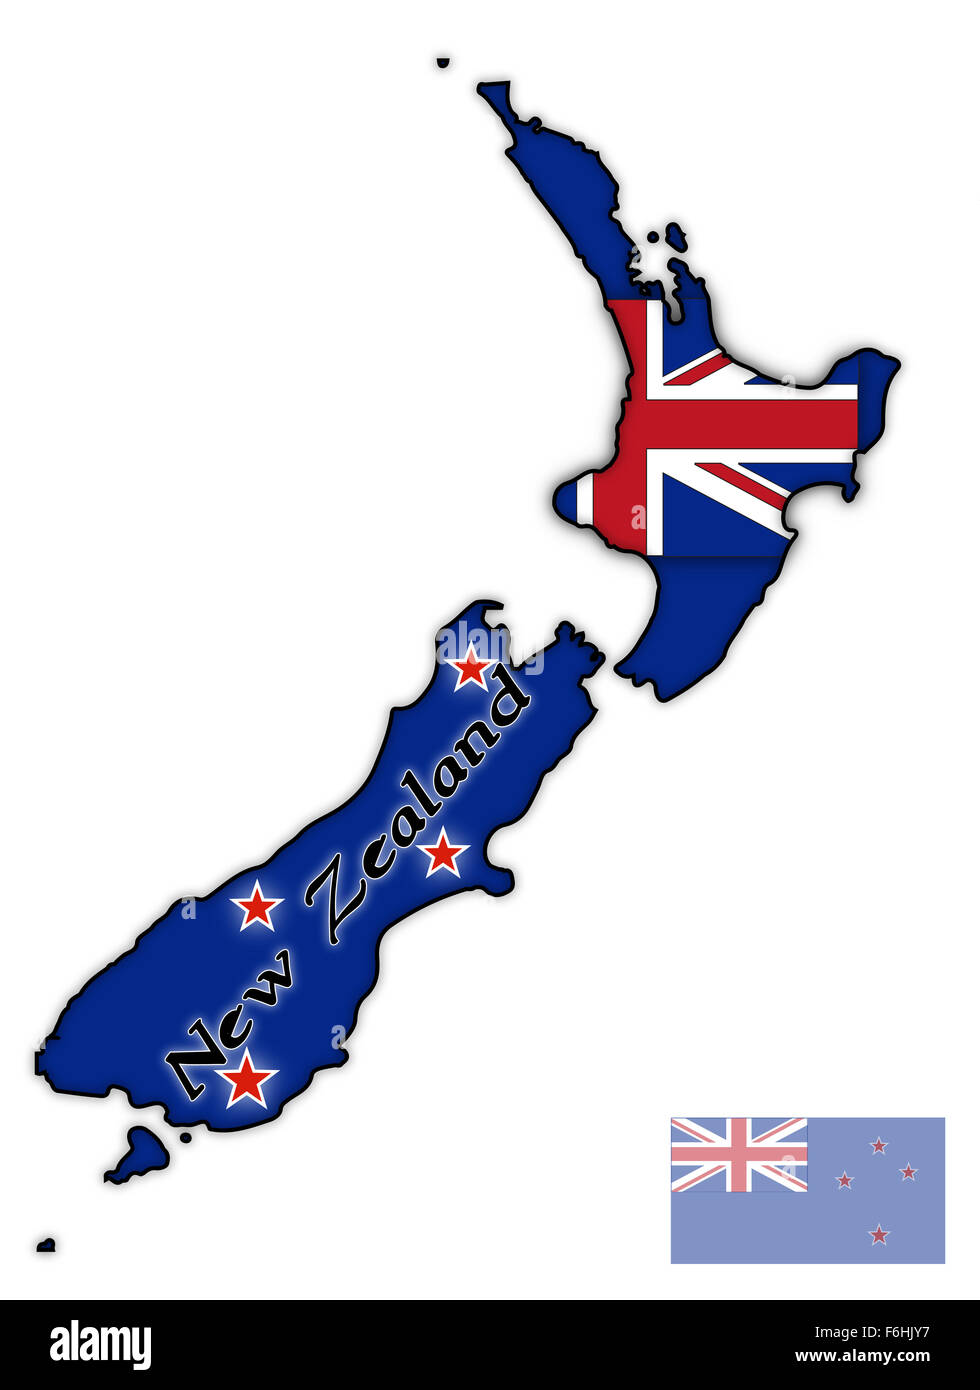 A New Zealand map with a flag design inside isolated on a white background Stock Photo